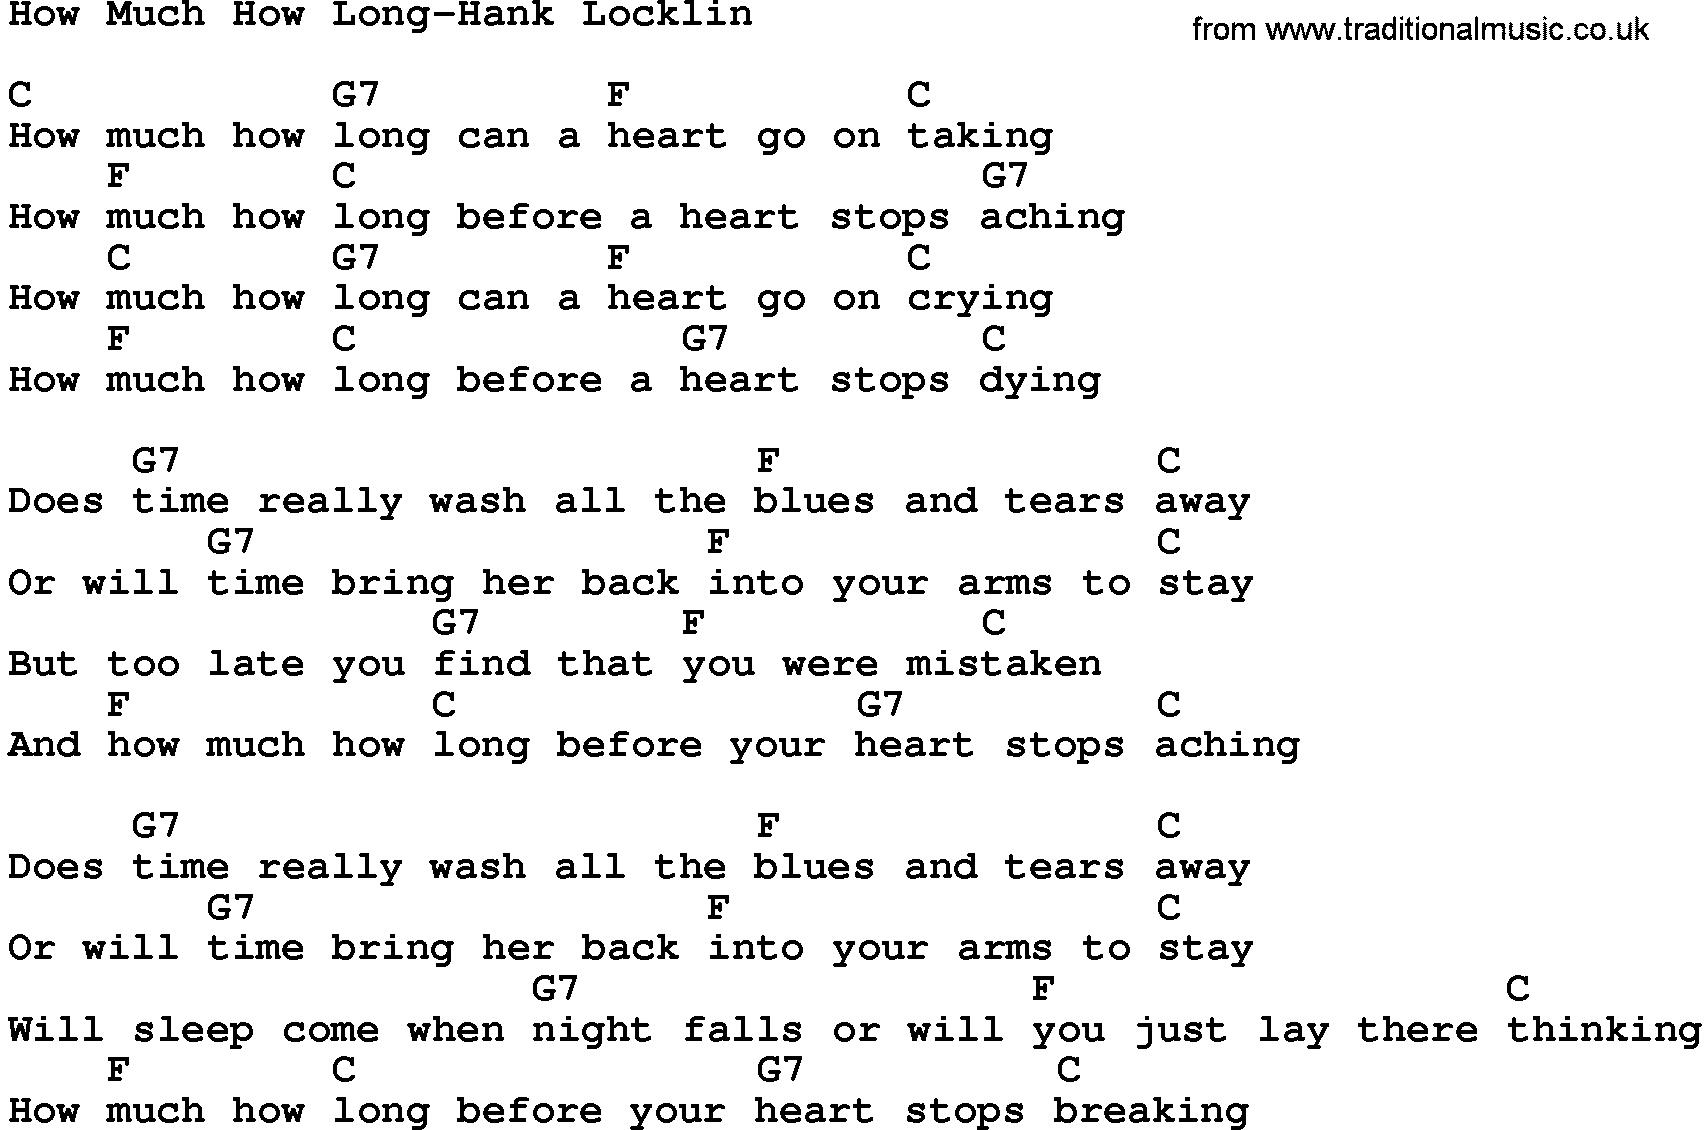 Country music song: How Much How Long-Hank Locklin lyrics and chords